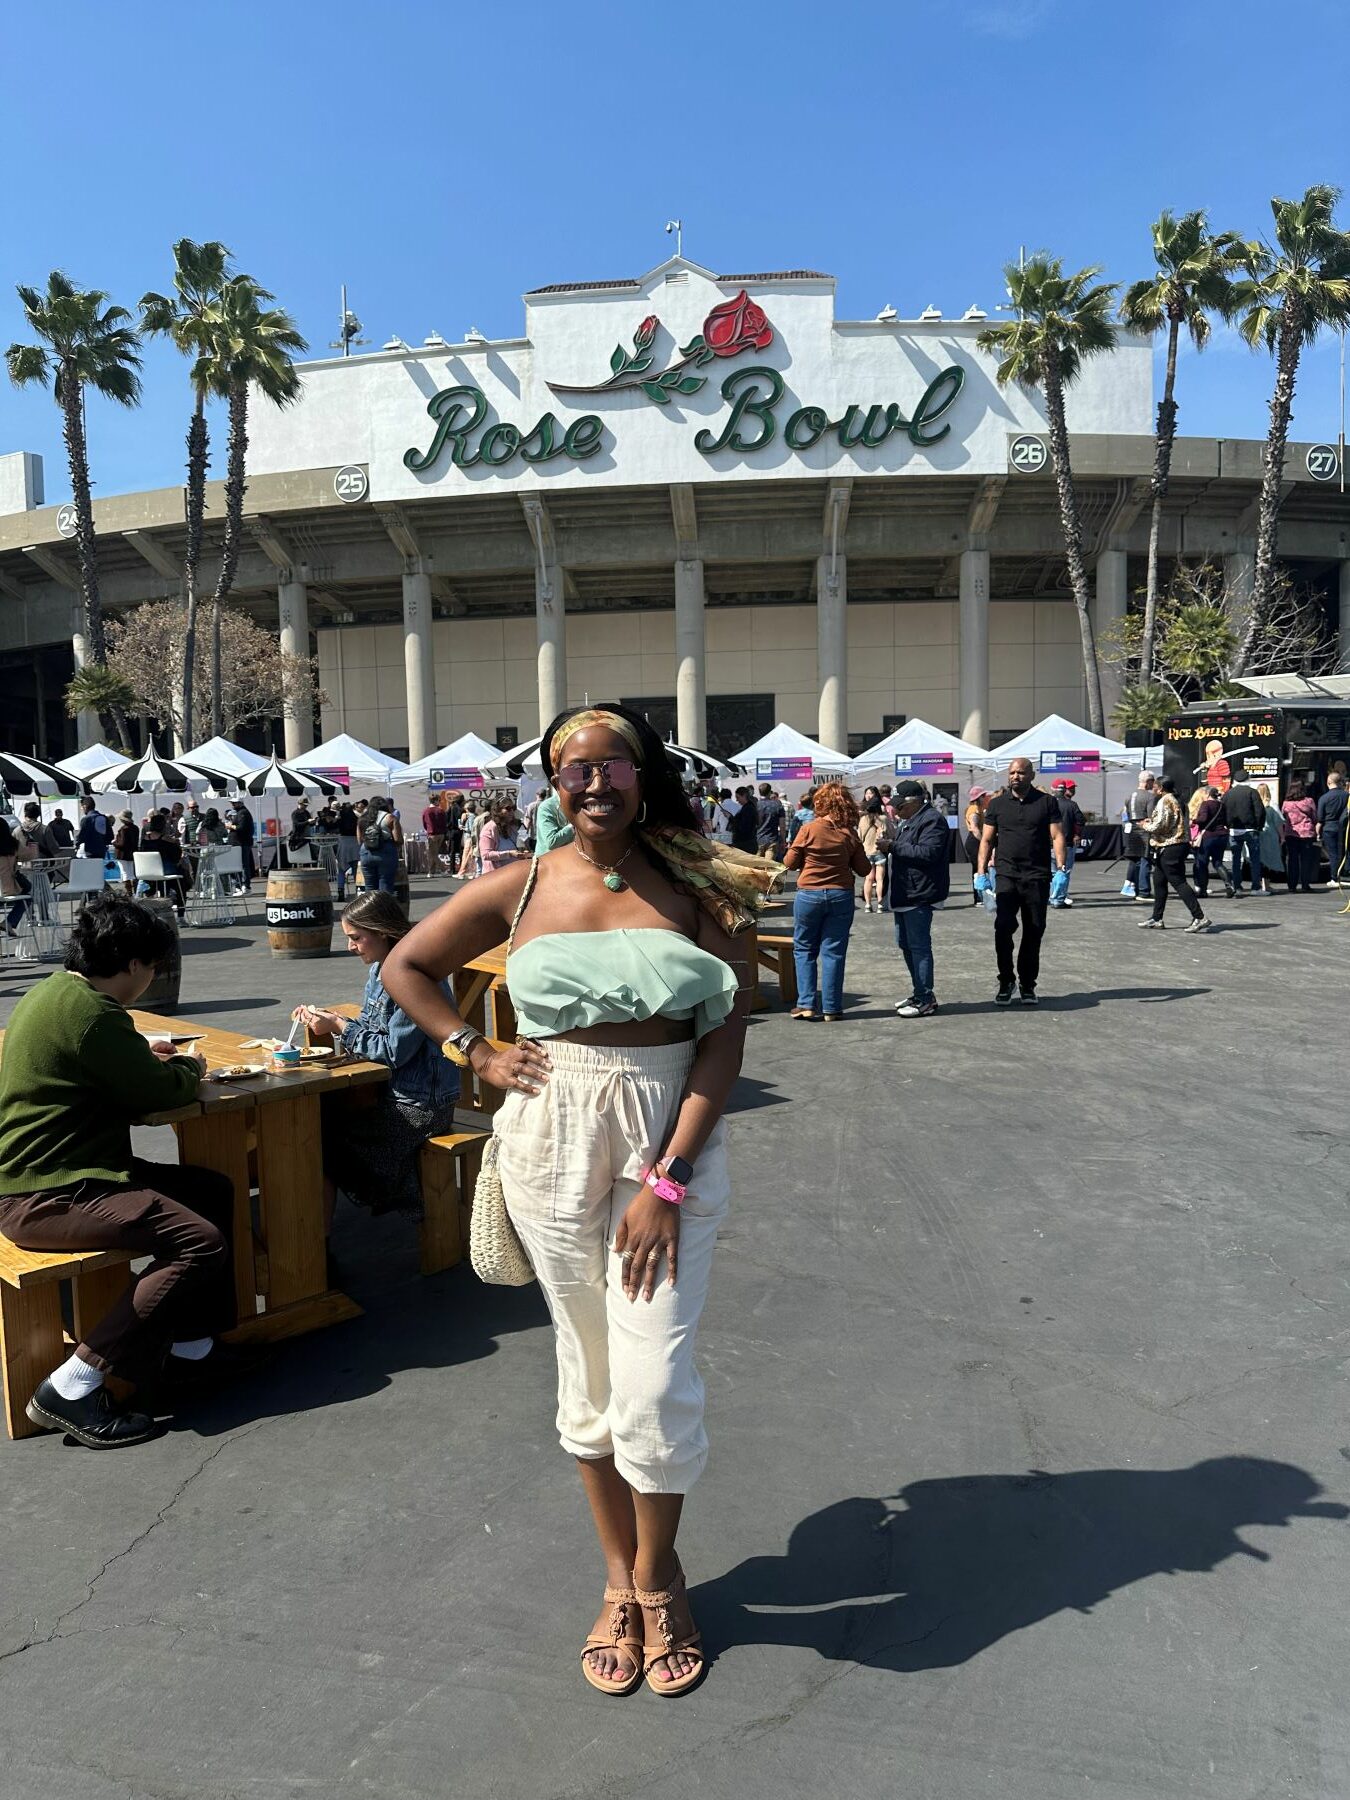 An image of lifestyle blogger Ariel outside the Rose Bowl.